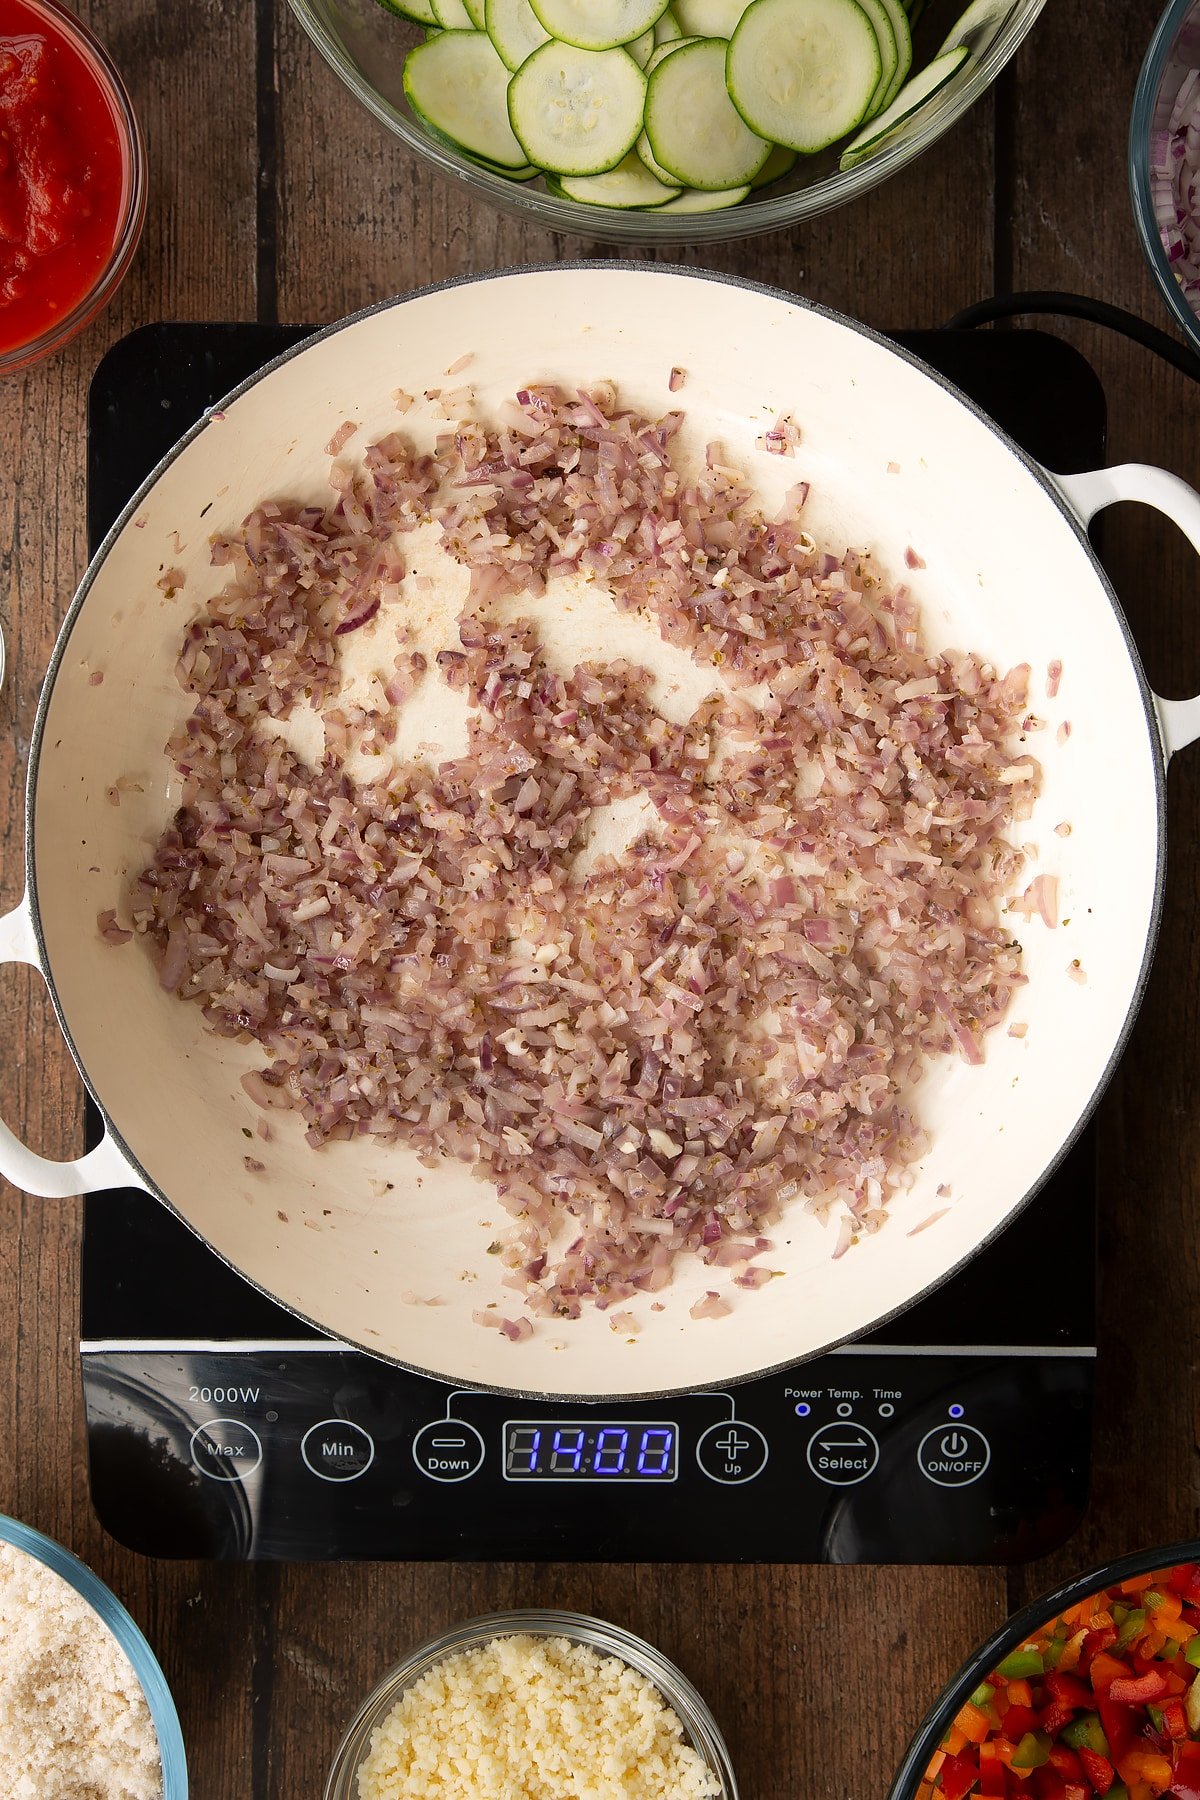 cooked dred onion and garlic mix in a large white frying pan on induction hob.